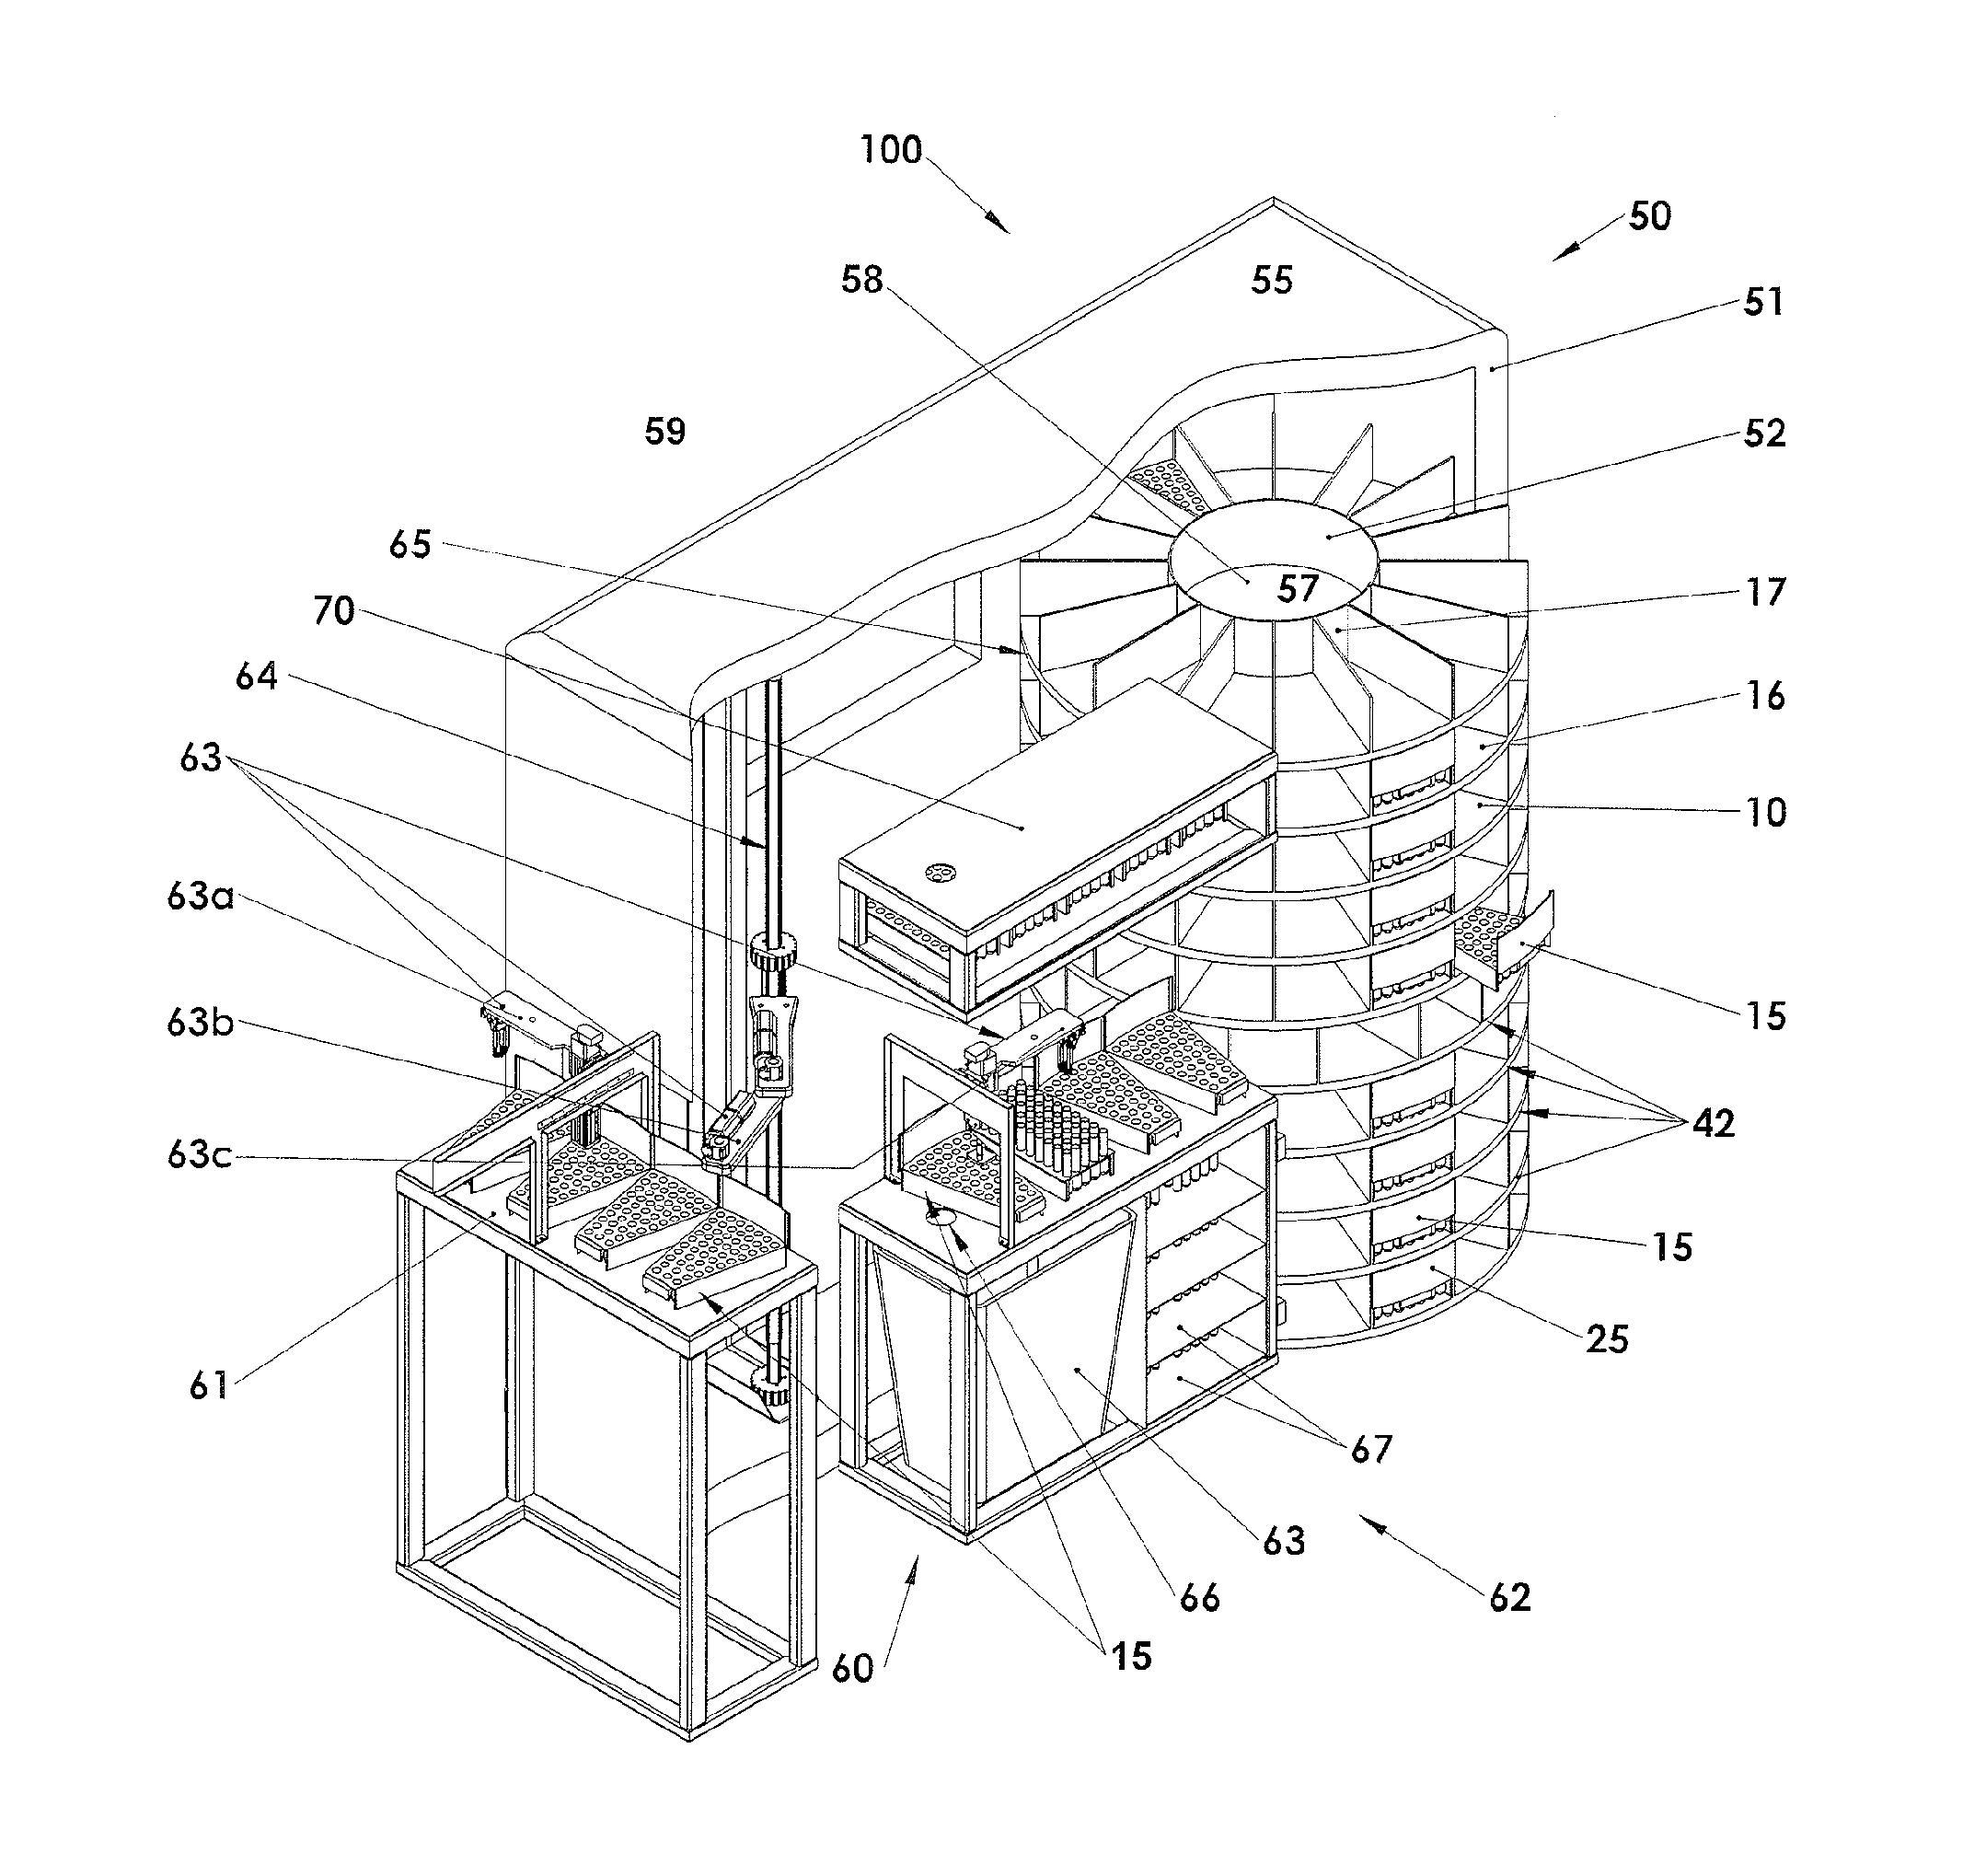 Automated, refrigerated specimen inventory management system